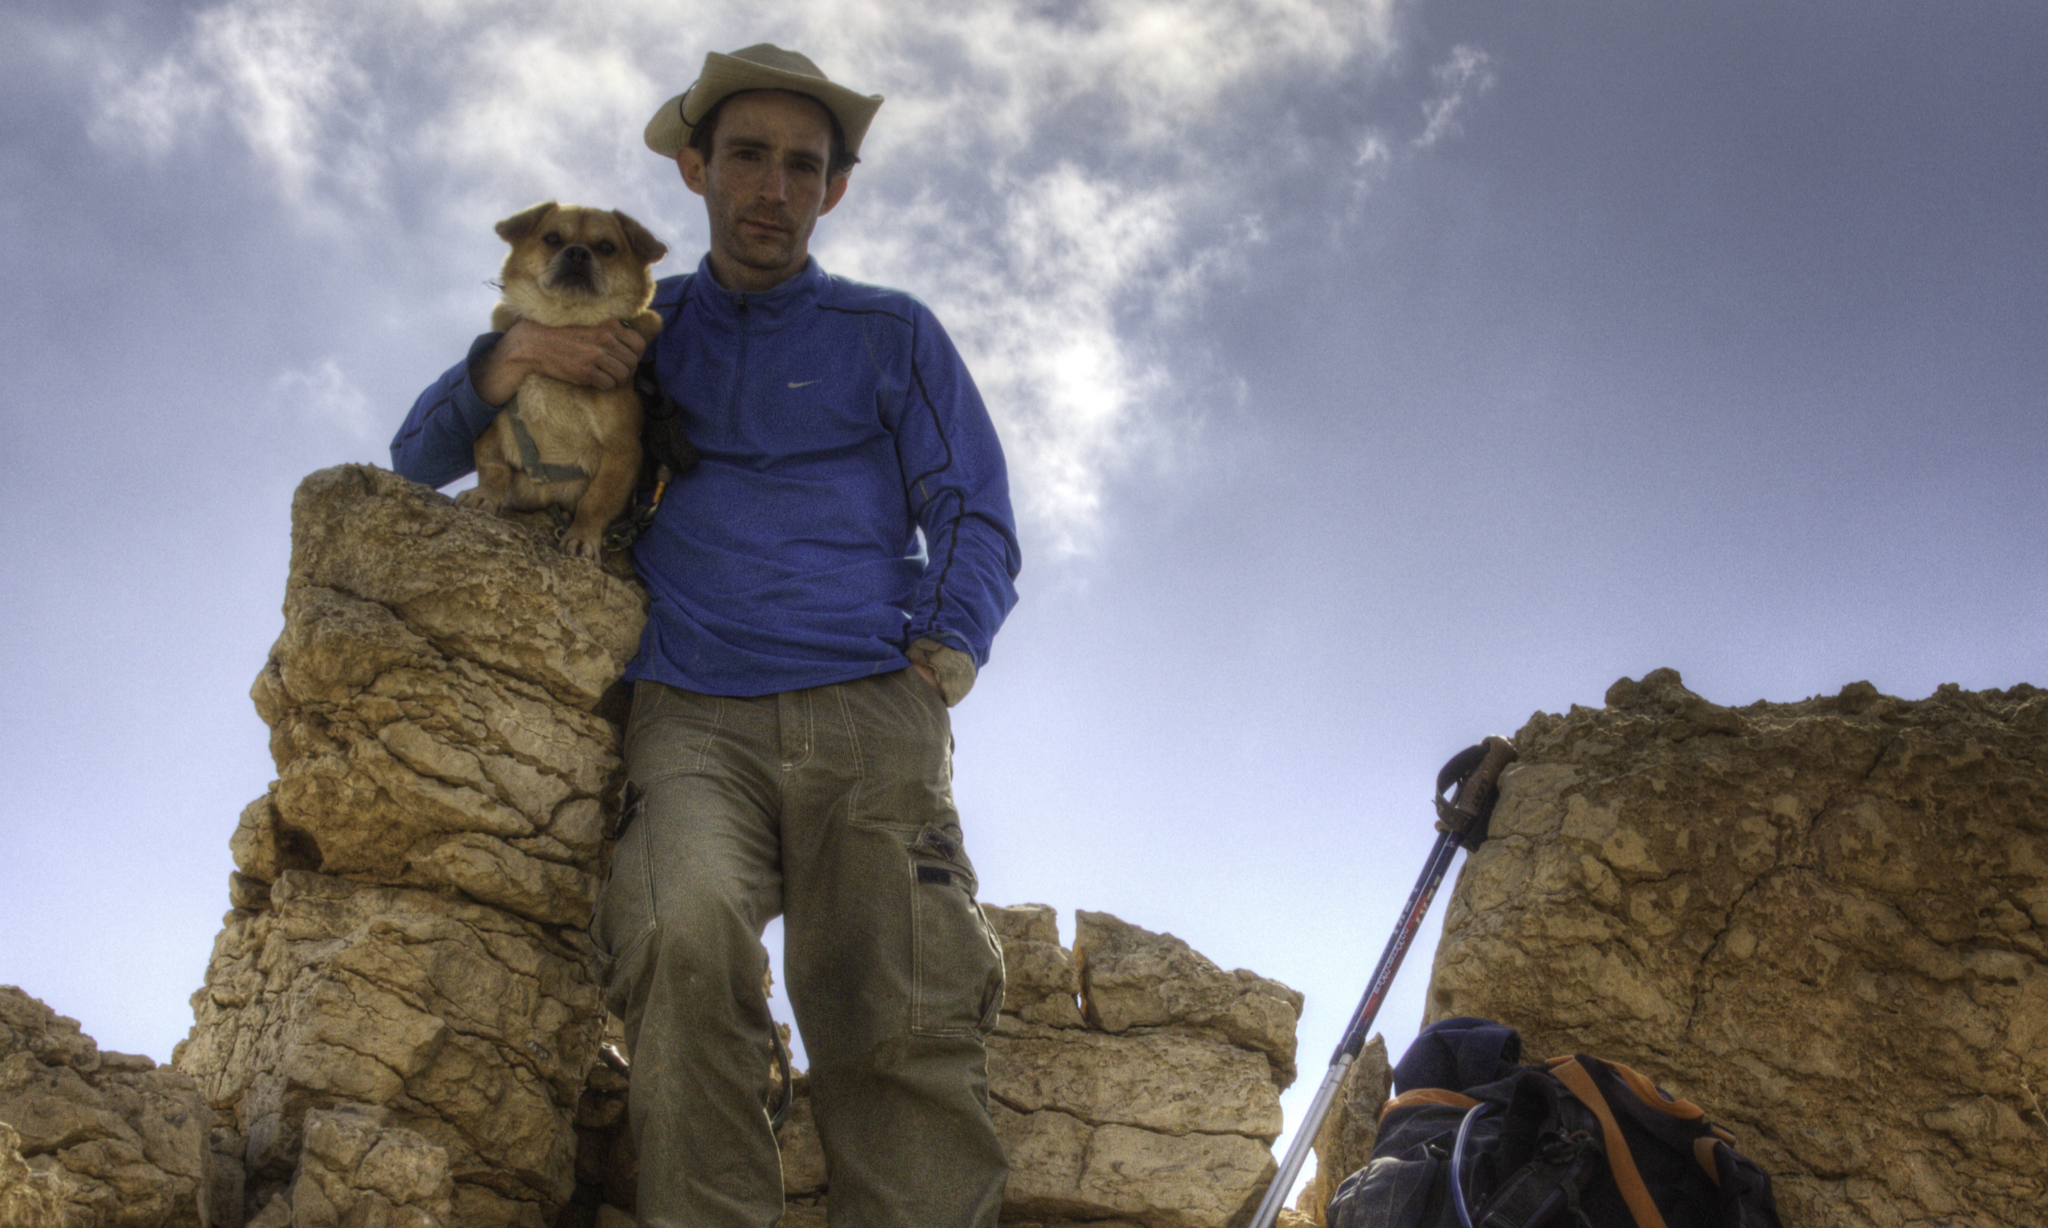 Assaf and his trusty companion Booli posing together atop a rocky crest